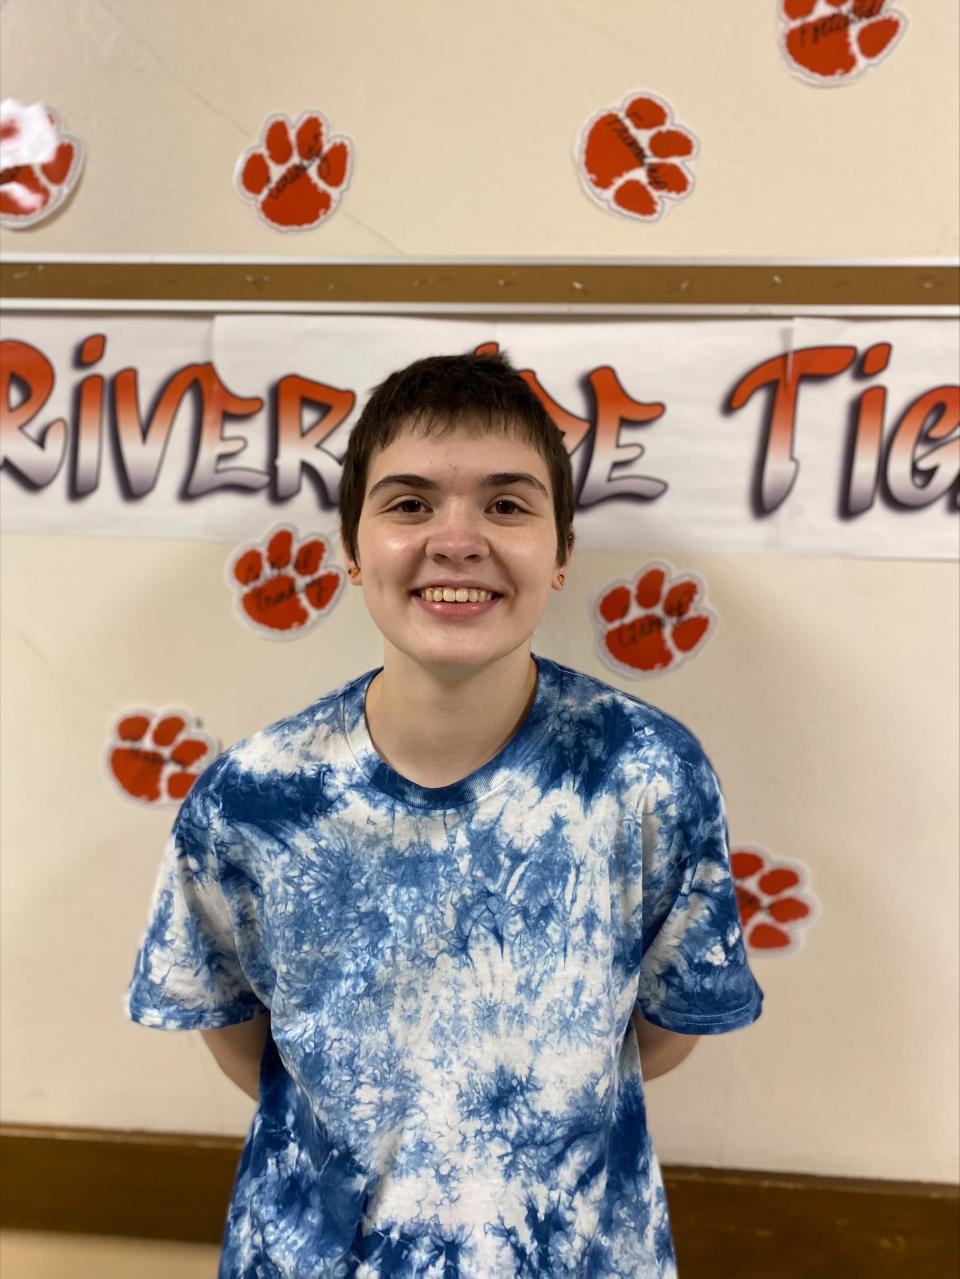 Tenth grader Auggie Hoffman won second place in the 2022 Dr. Martin Luther King, Jr. Writing Contest. "Peace means that there are no hate crimes and/or discriminatory violence. Laws being made against LGBTQ individuals and discrimination against black people both in law and socially causes unrest among the people," they wrote.